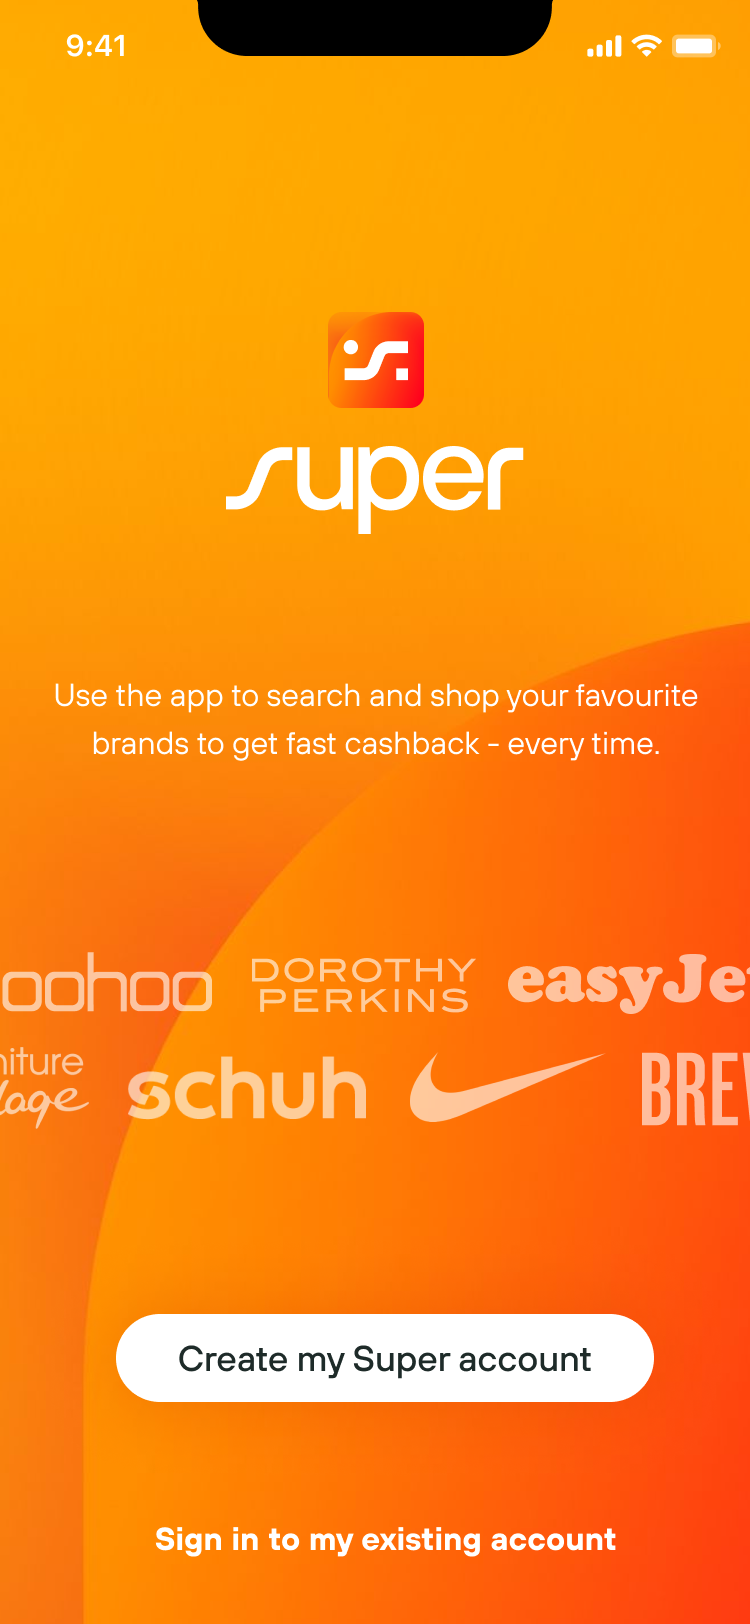 Super Payments Raises £22.5 Million to Let Businesses and Shoppers Keep More of Their Money